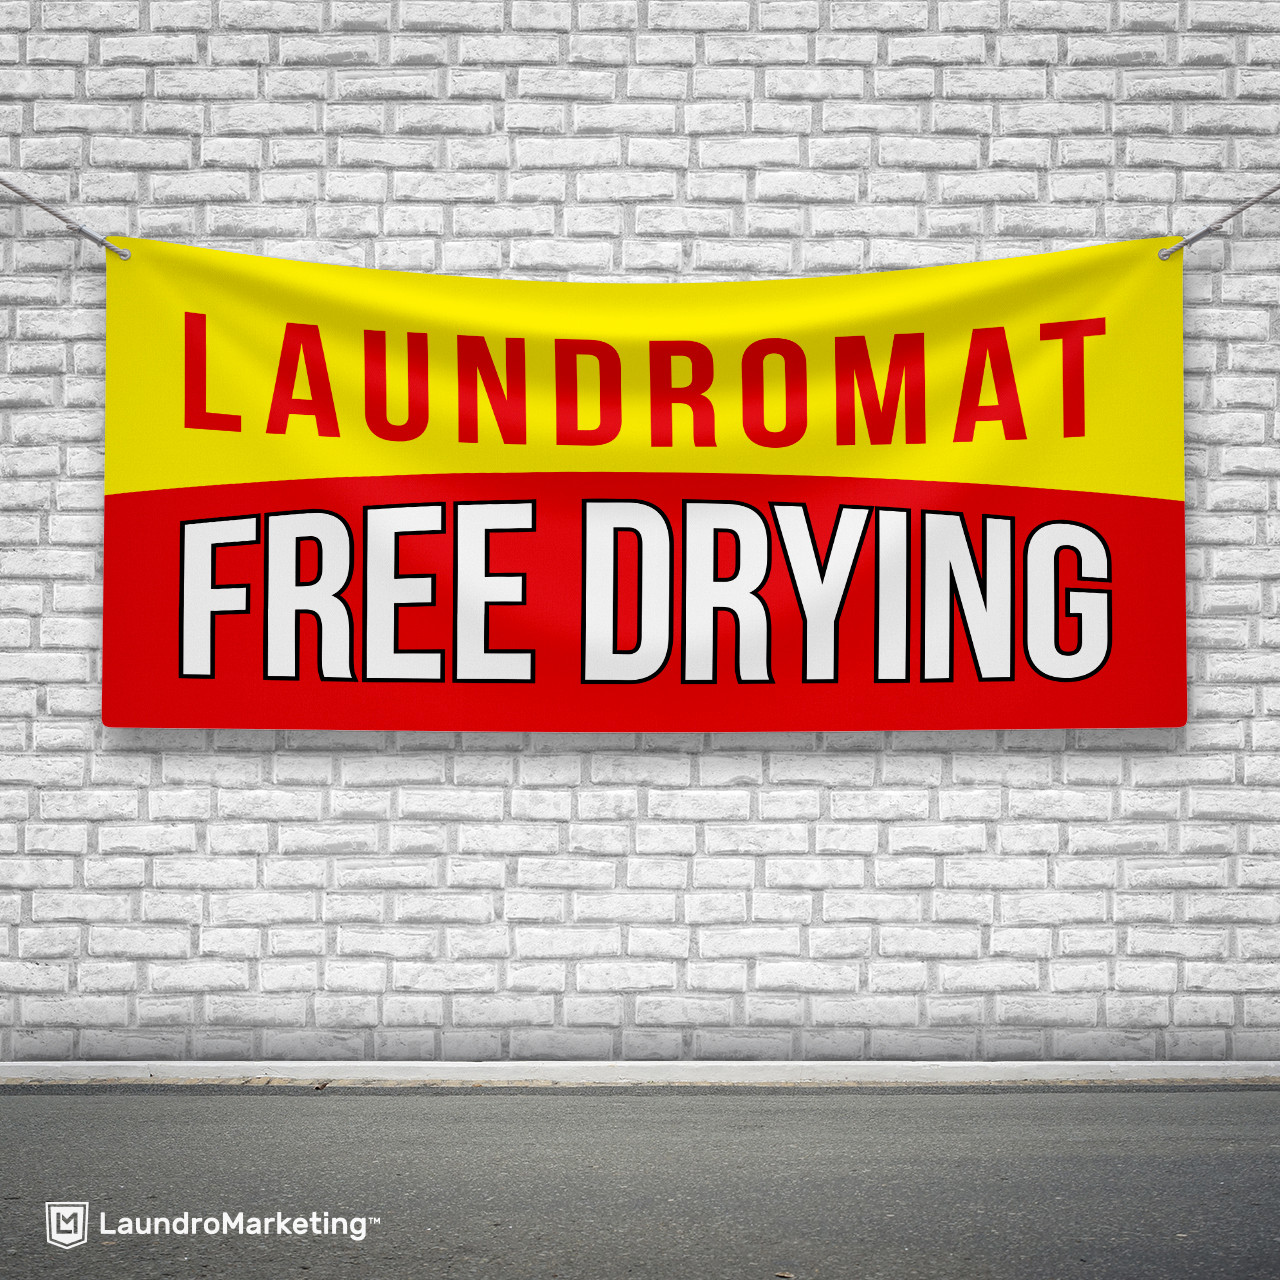 Laundromat Free Drying Banner - Red/Yellow